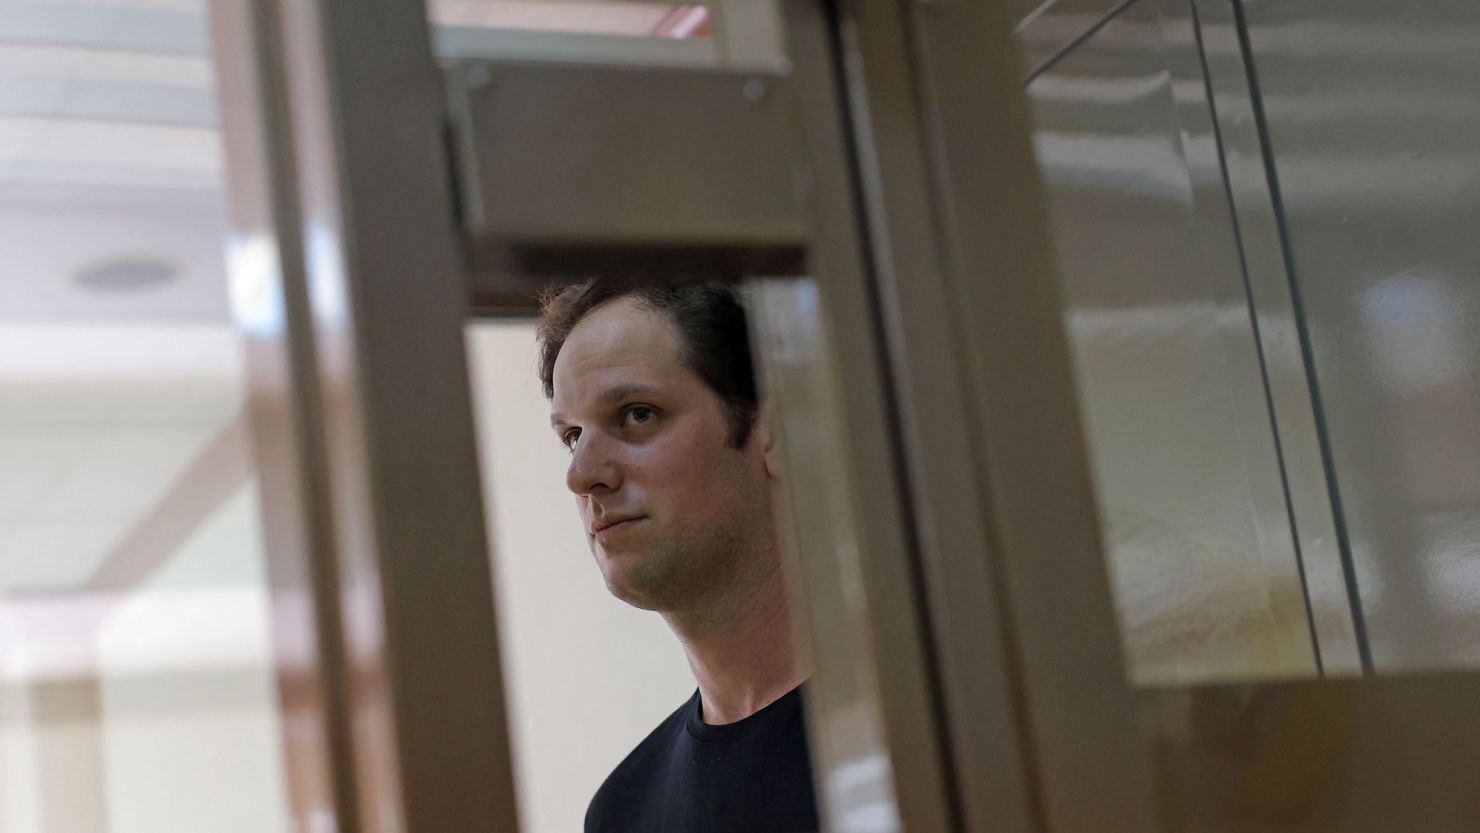 Wall Street Journal reporter Evan Gershkovich, who was arrested in March while on a reporting trip and accused of espionage, stands behind a glass wall of an enclosure for defendants before a court hearing to consider an appeal against his detention, in Moscow, Russia June 22, 2023. REUTERS/Evgenia Novozhenina